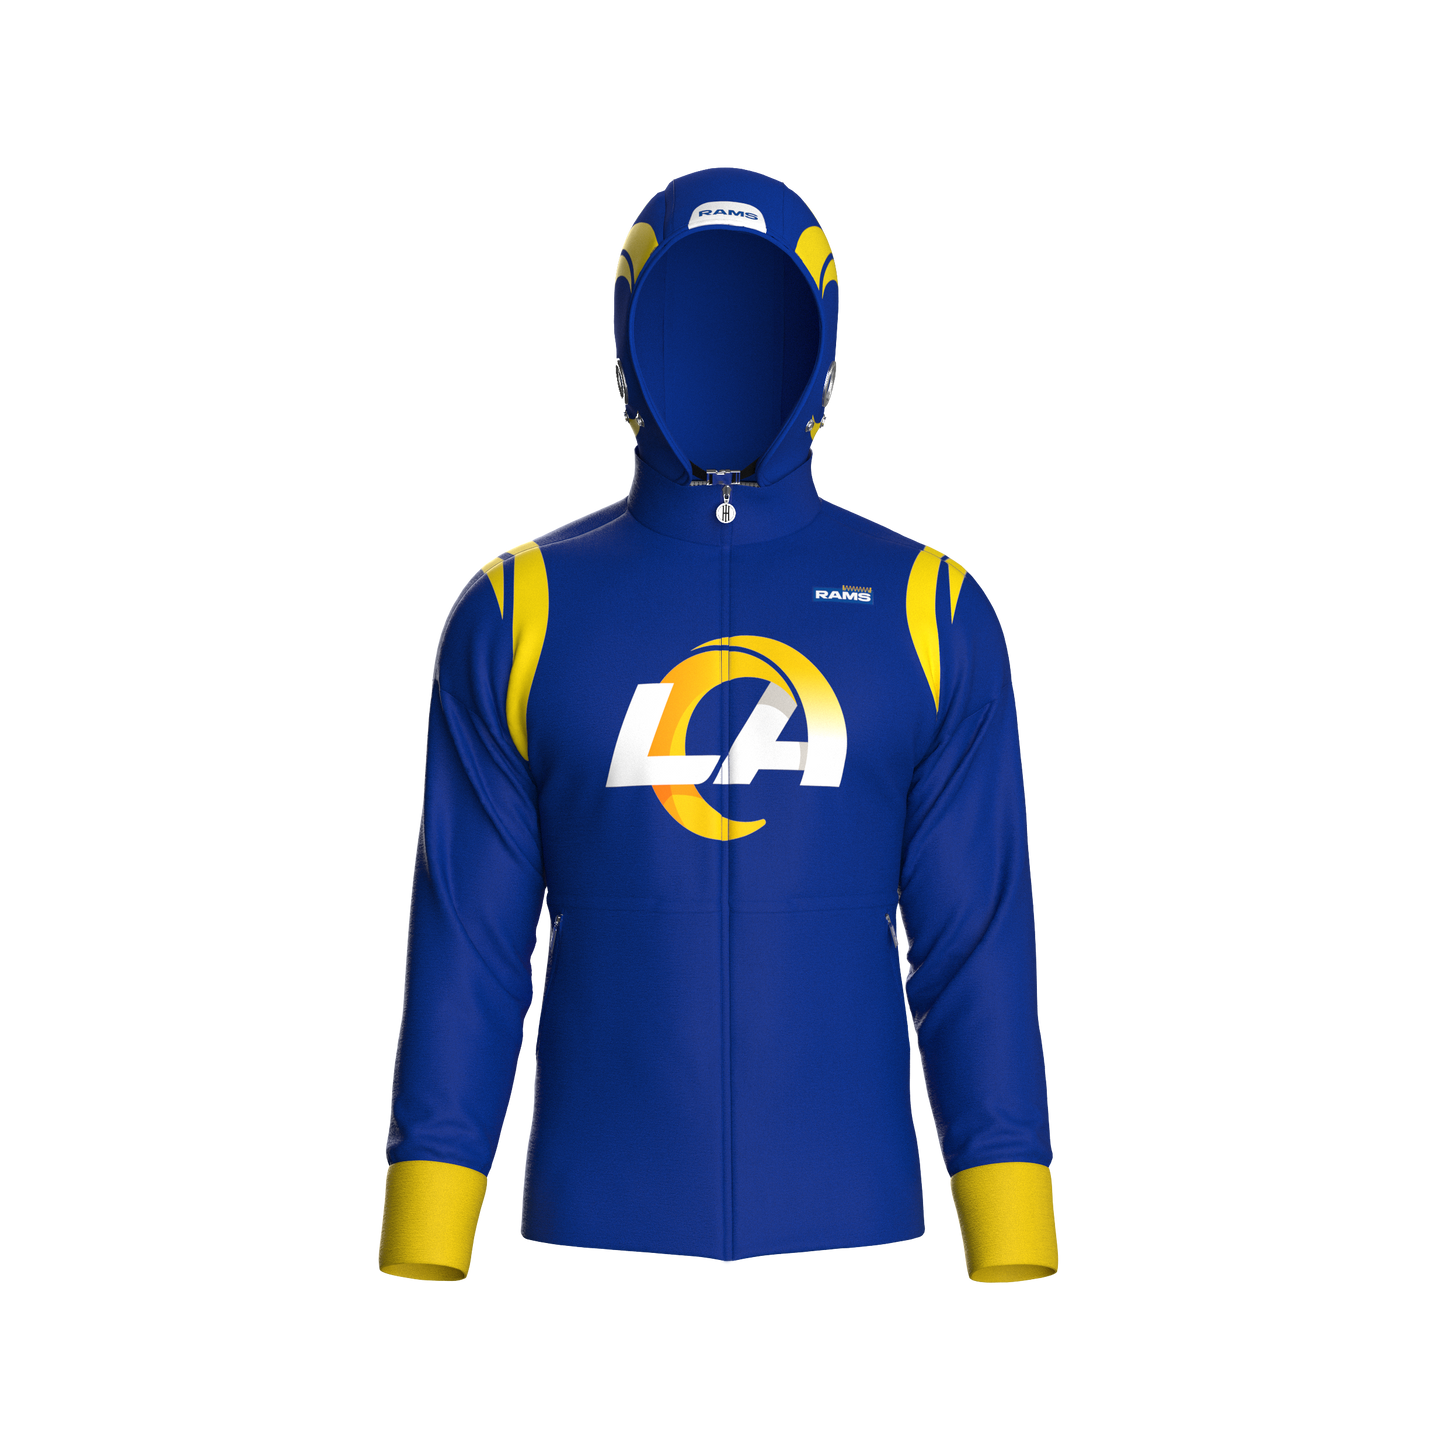 Los Angeles Rams Home Zip-Up (youth)